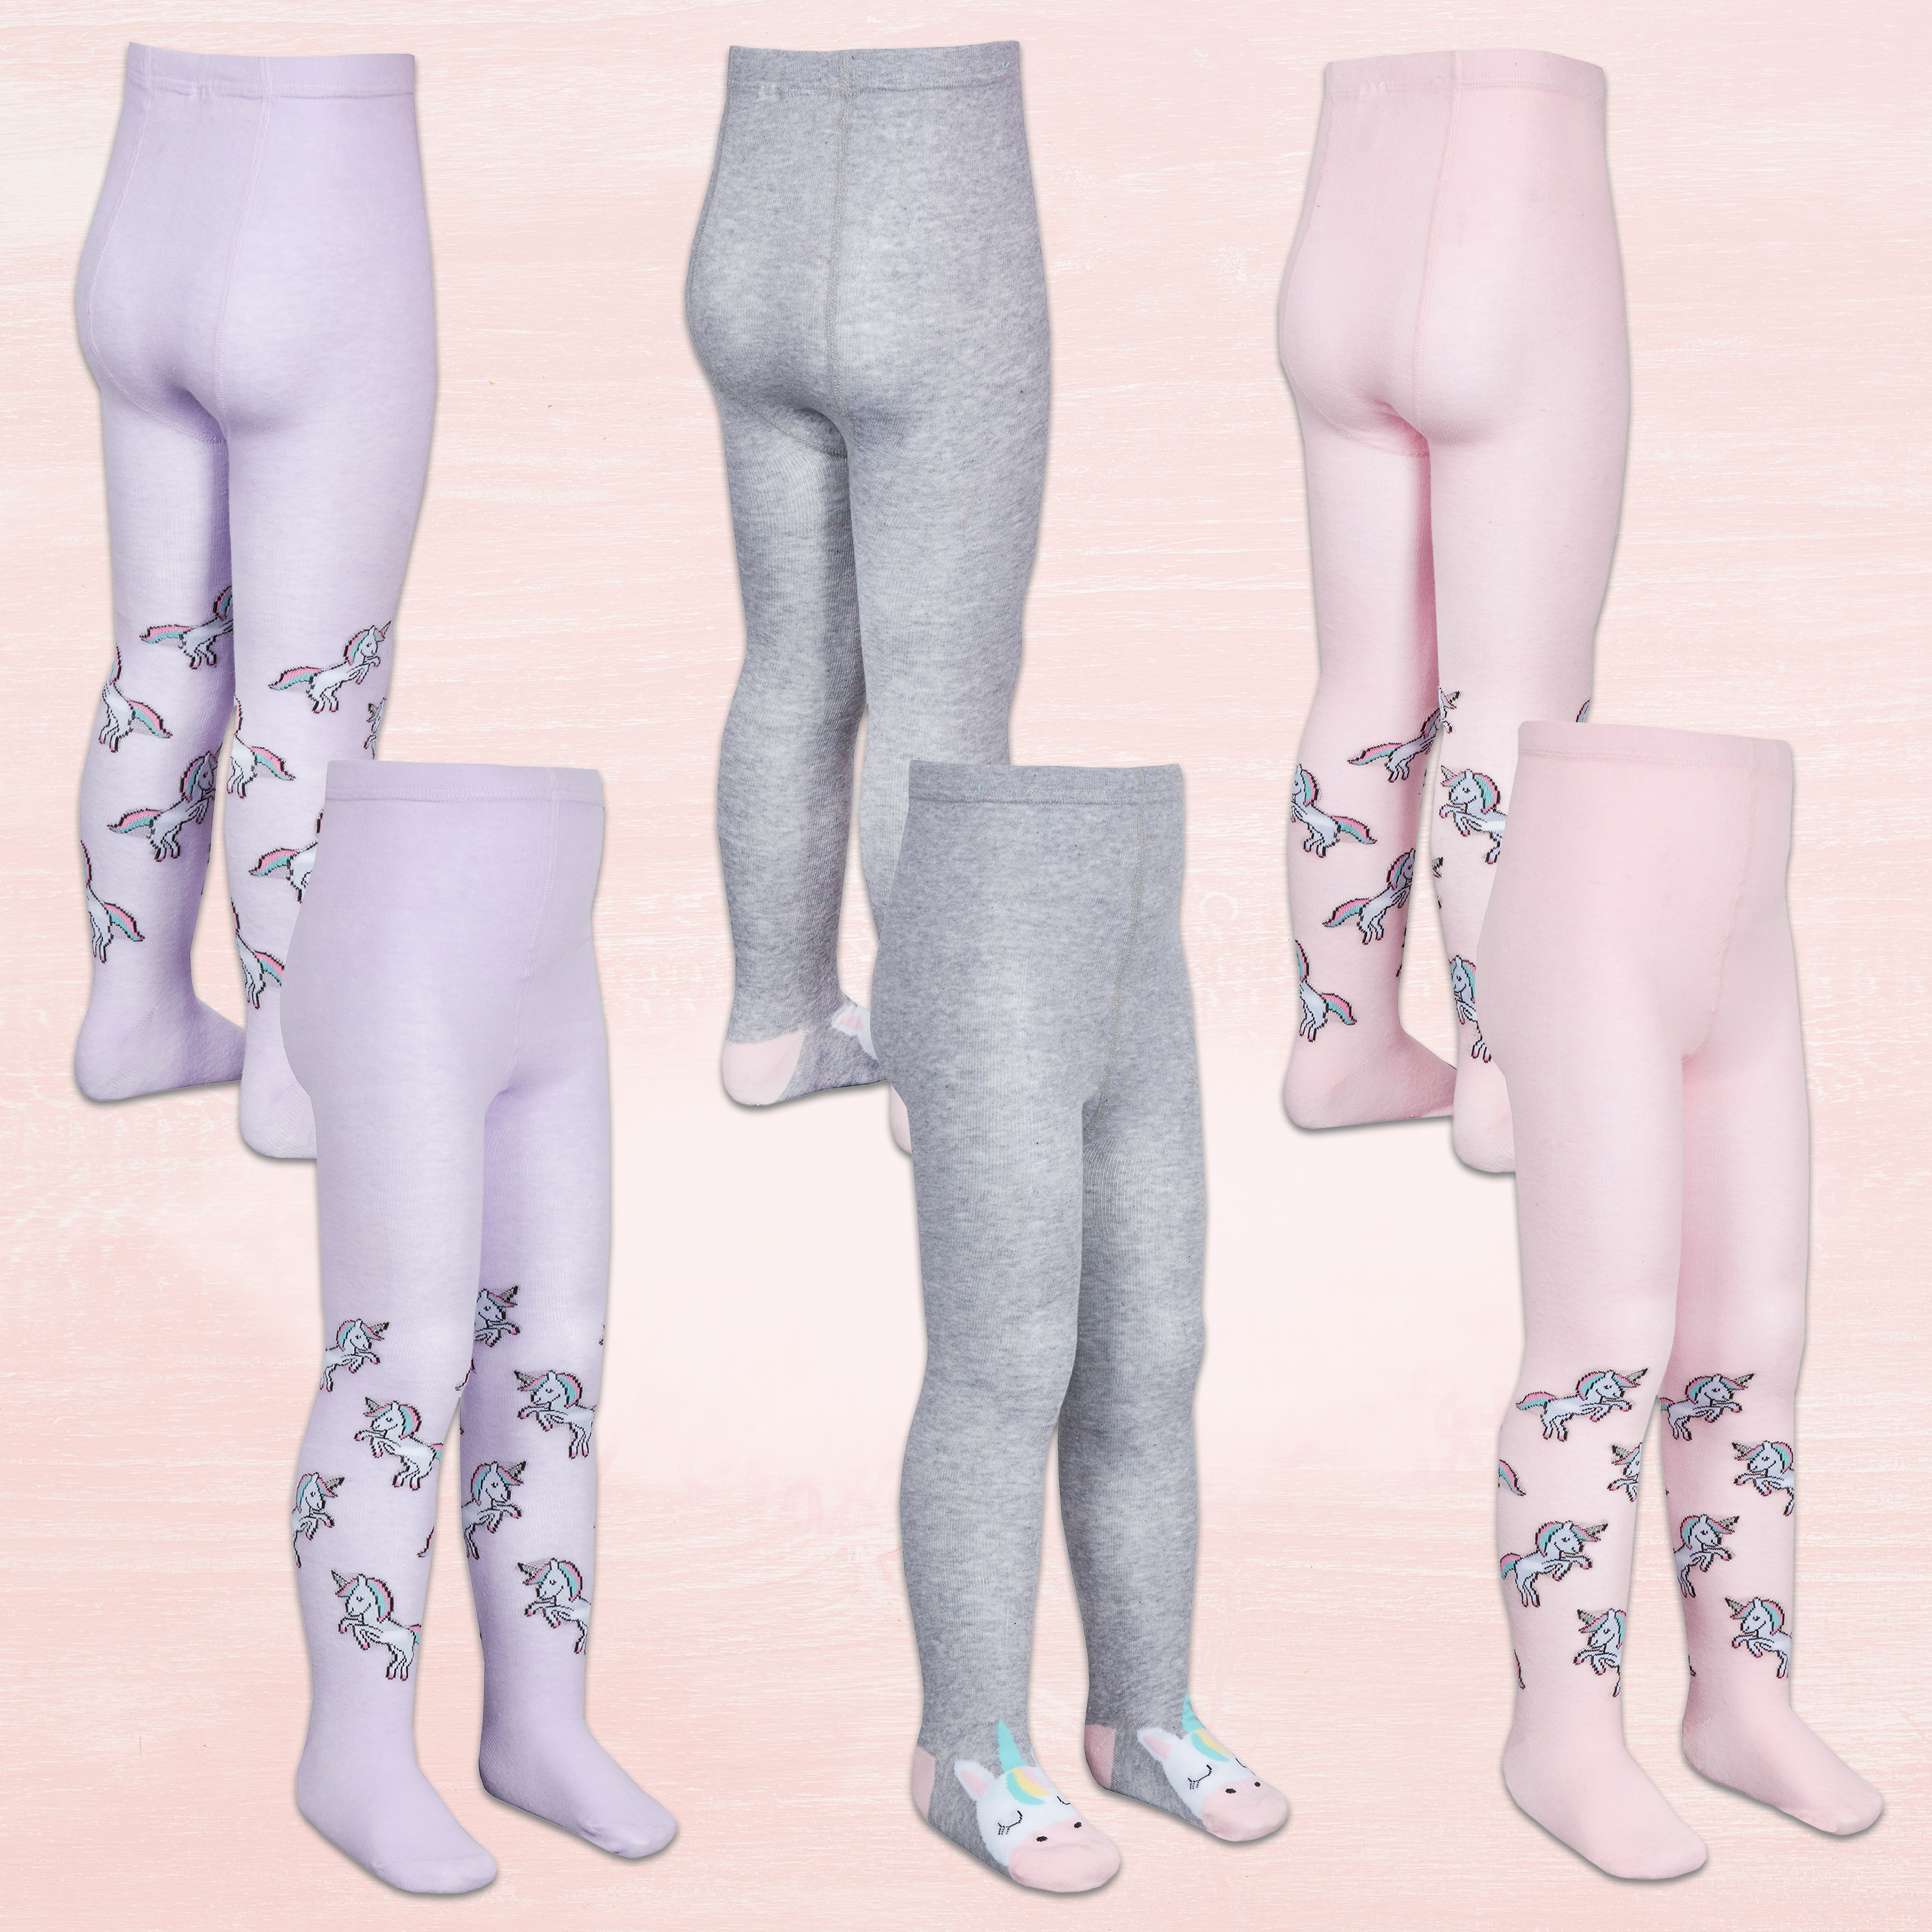 Leggings That Look Like Tights Uke  International Society of Precision  Agriculture